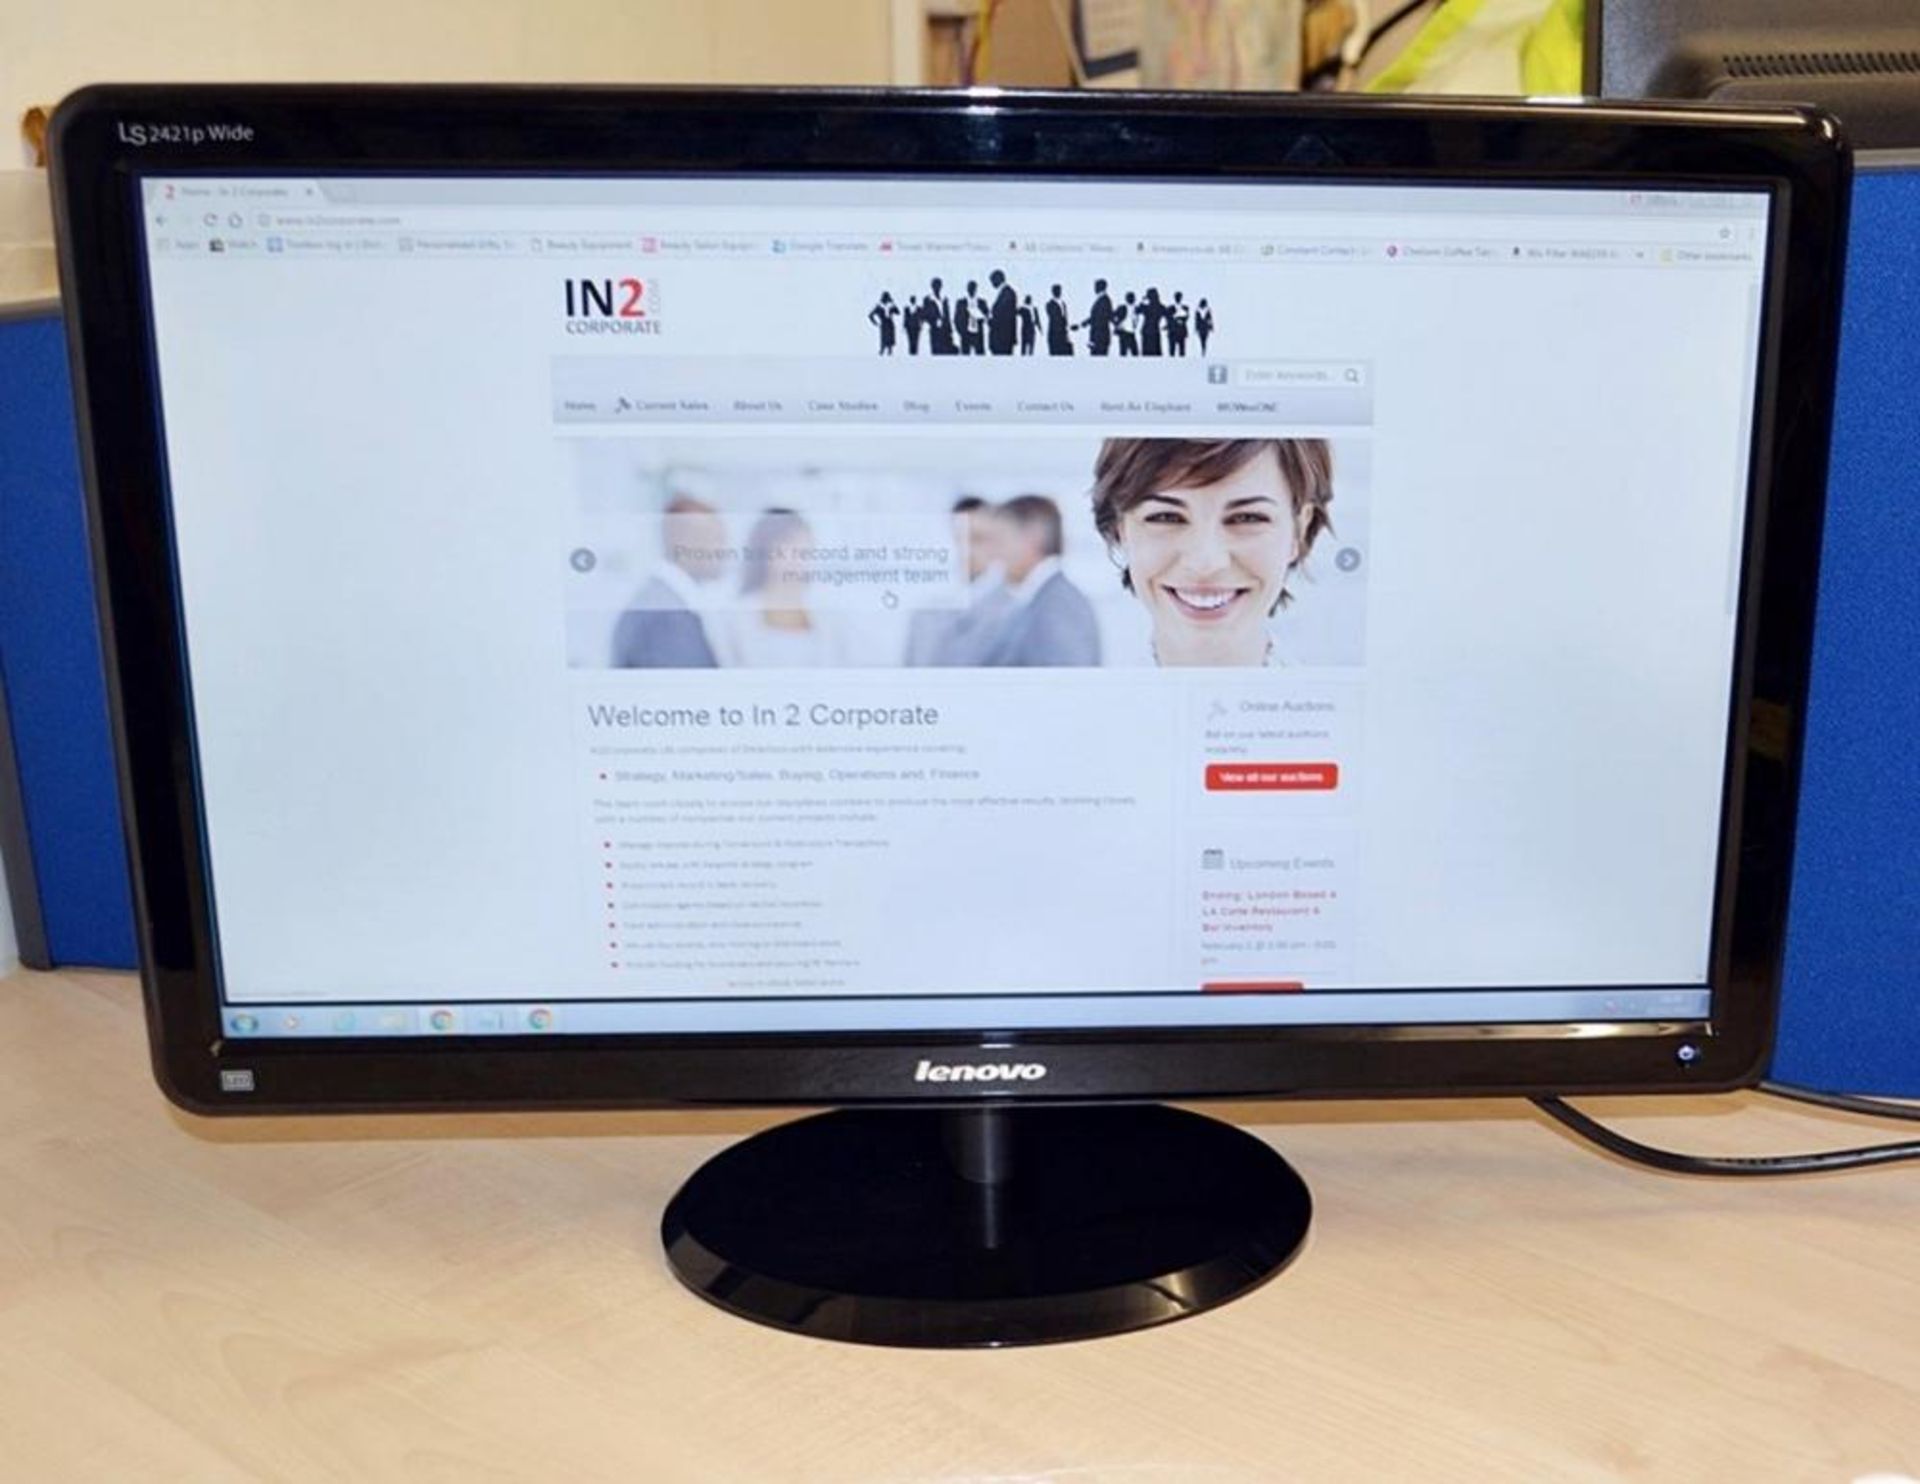 1 x Lenovo LS2421p Wide 23.6" Full HD LED TFT Monitor (Model: 4015-LS1) - Recently Taken From A Work - Image 13 of 14